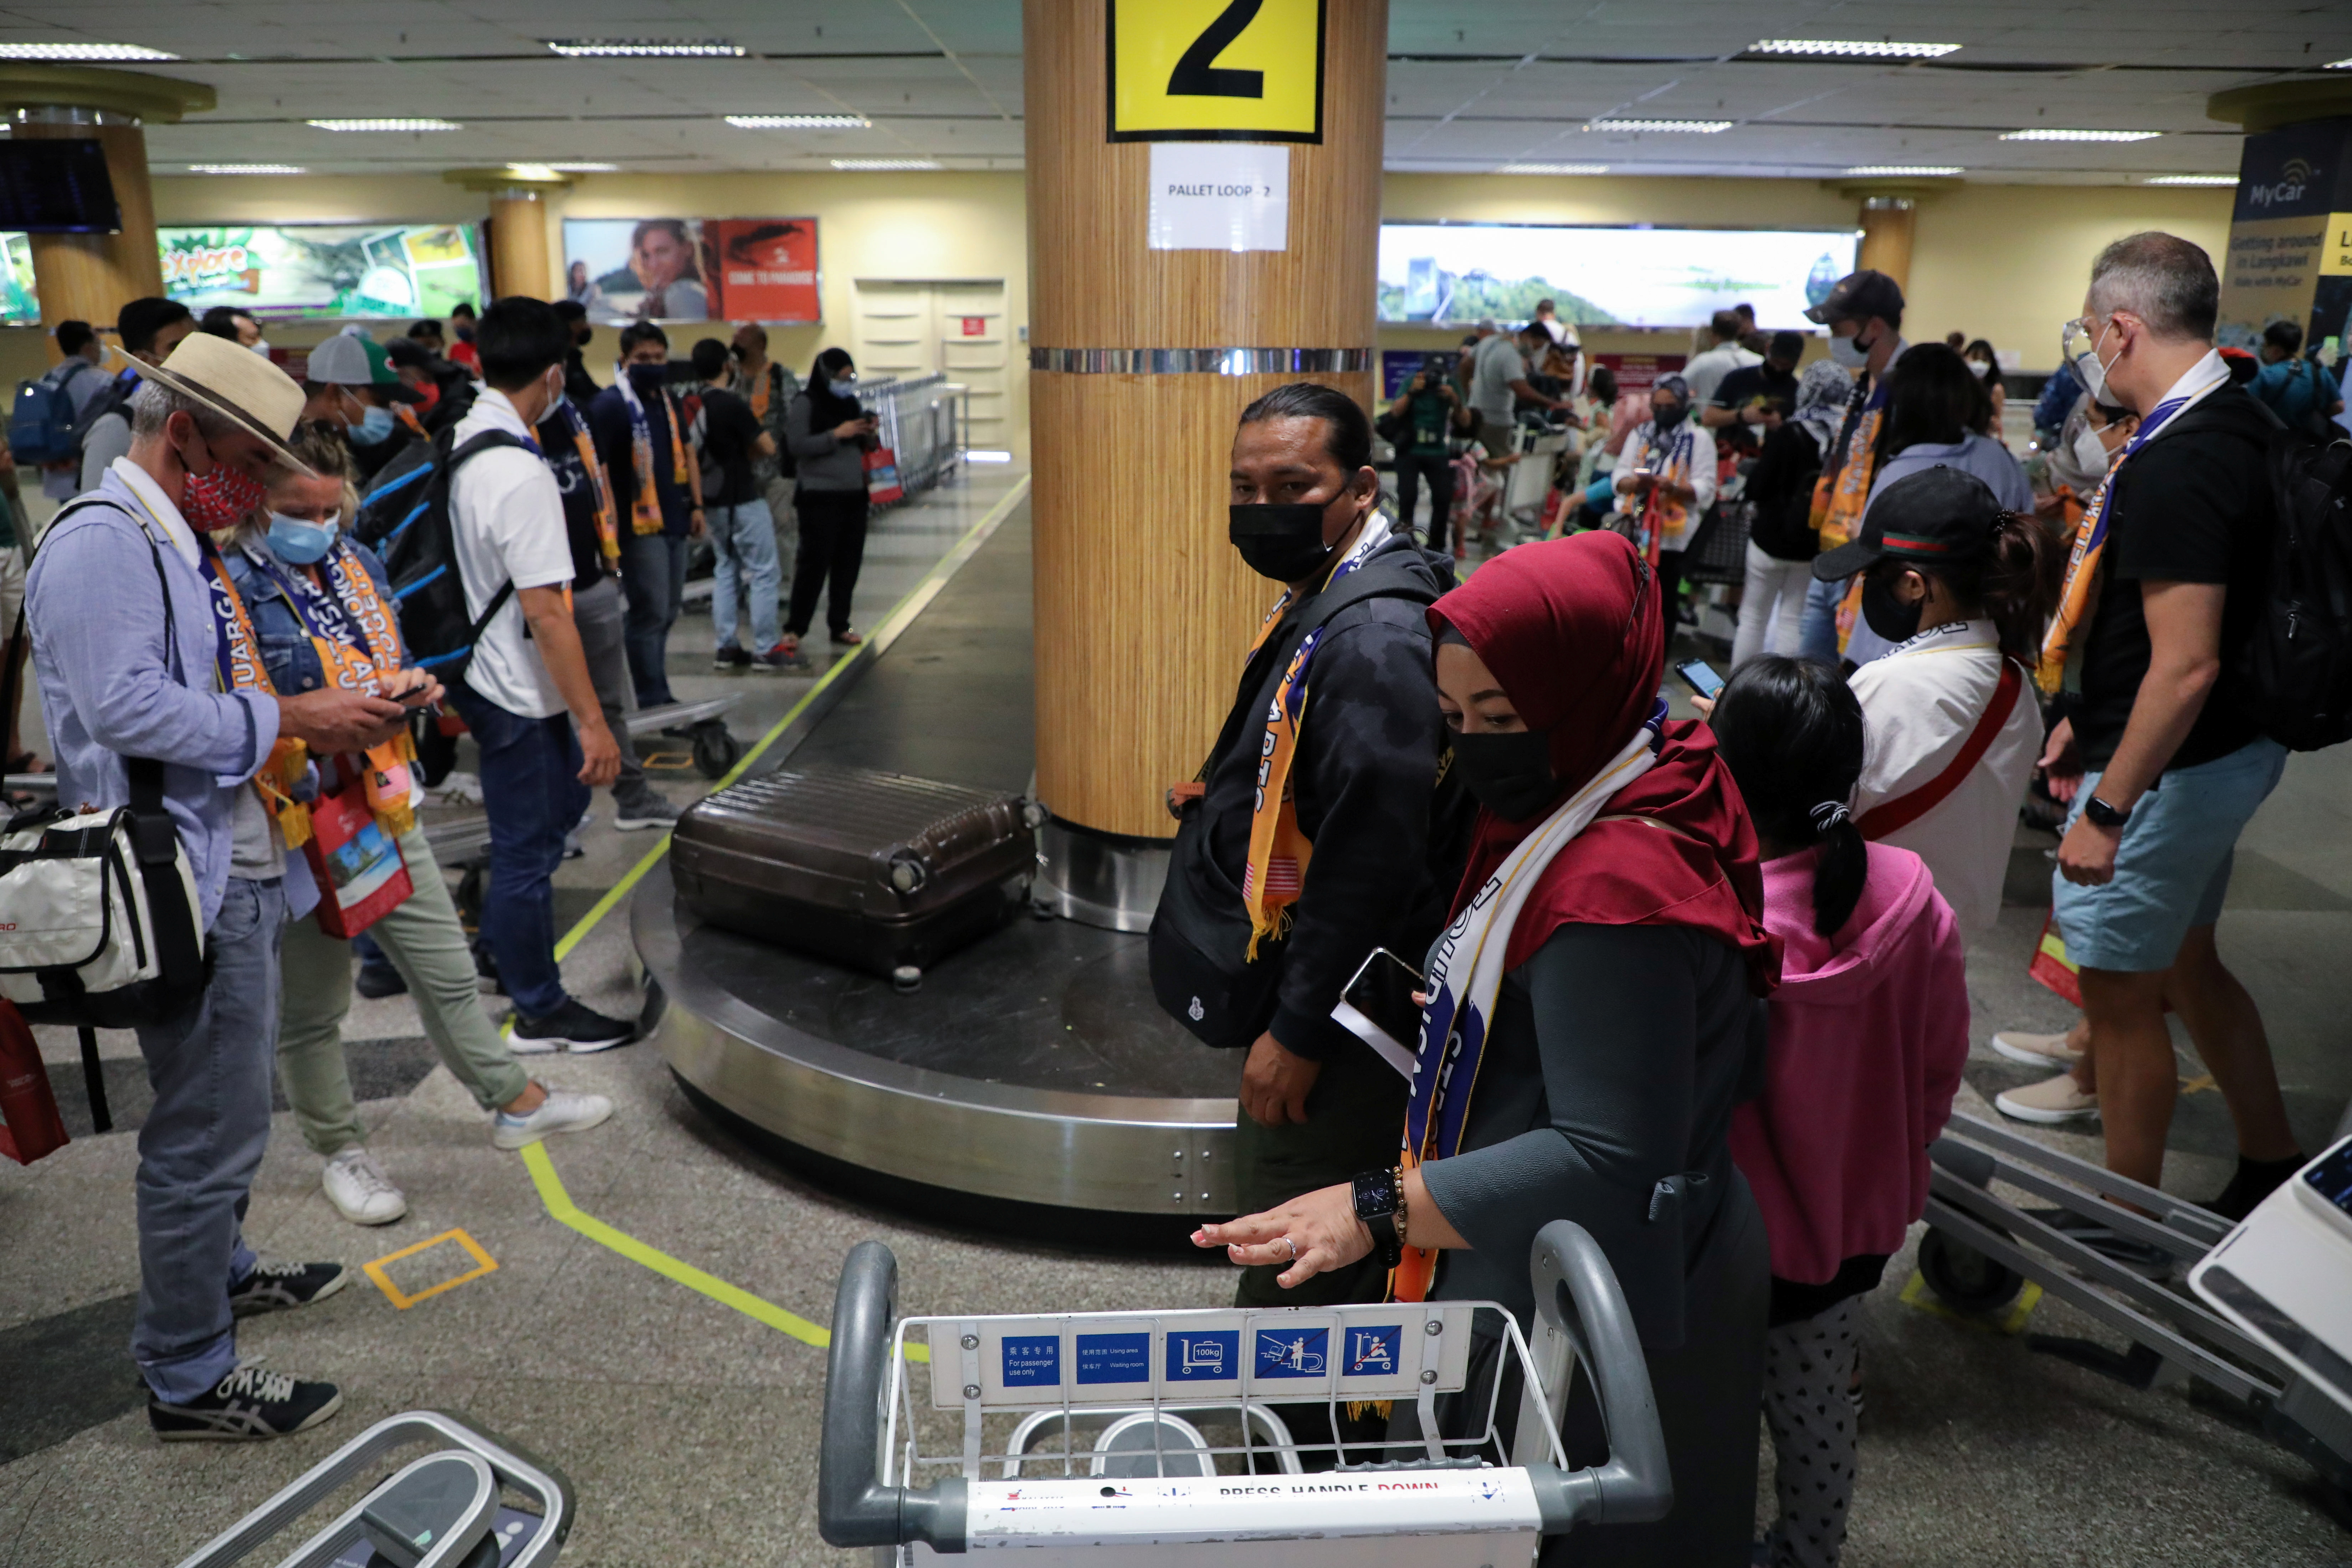 Tourists wait for their luggage at the arrival hall, as Langkawi reopens to domestic tourists, amid the coronavirus disease (COVID-19) pandemic, in Malaysia September 16, 2021. REUTERS/Lim Huey Teng